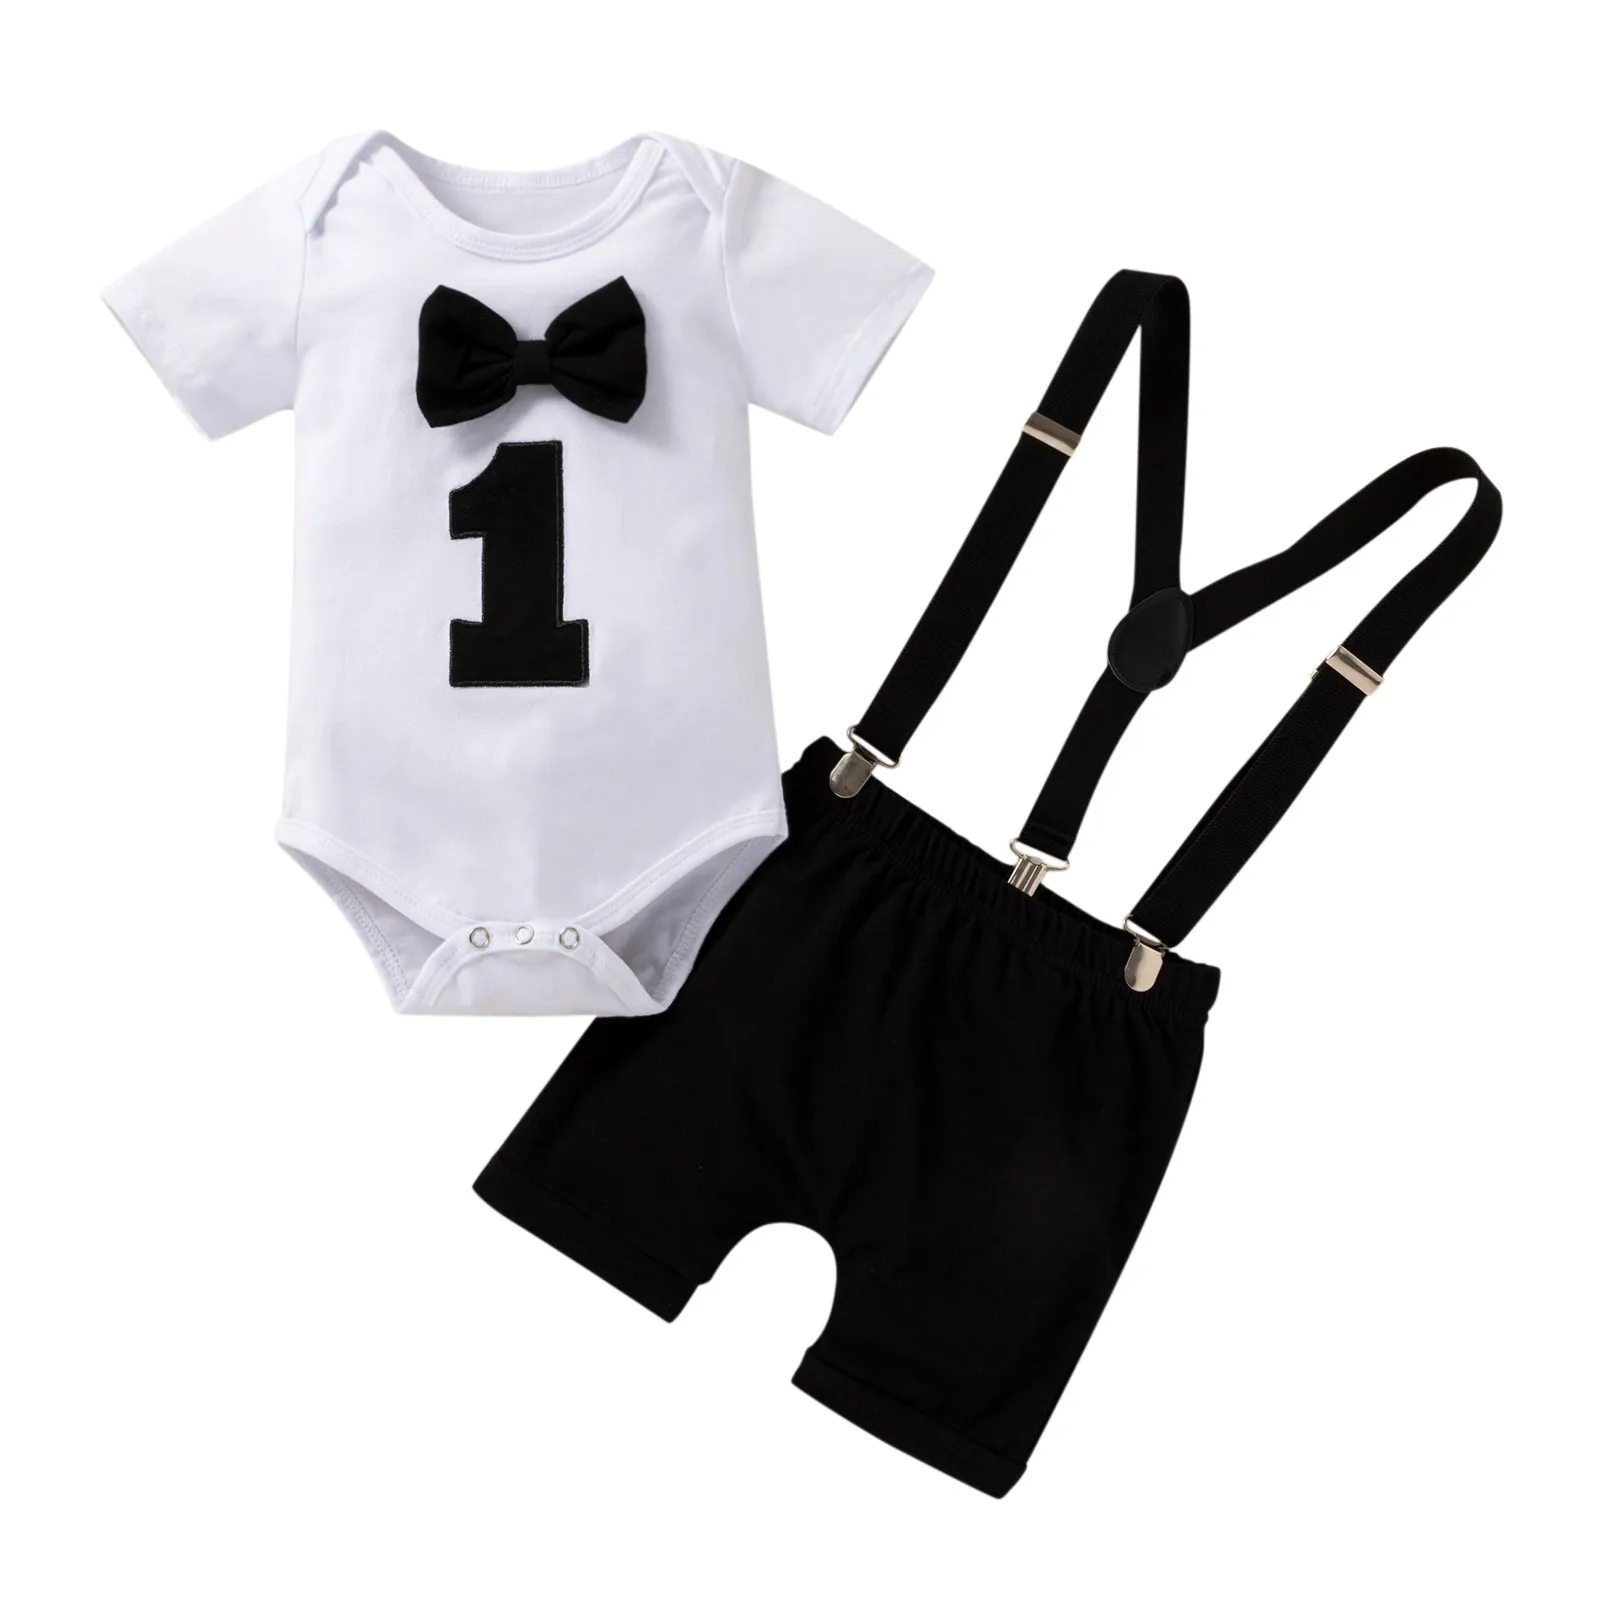 Miaouyo Baby Boys Girls 1st Birthday Romper Outfits My 1st Birthday Bodysuit Infant Newborn Baby Jumpsuit Pajamas Outfits 